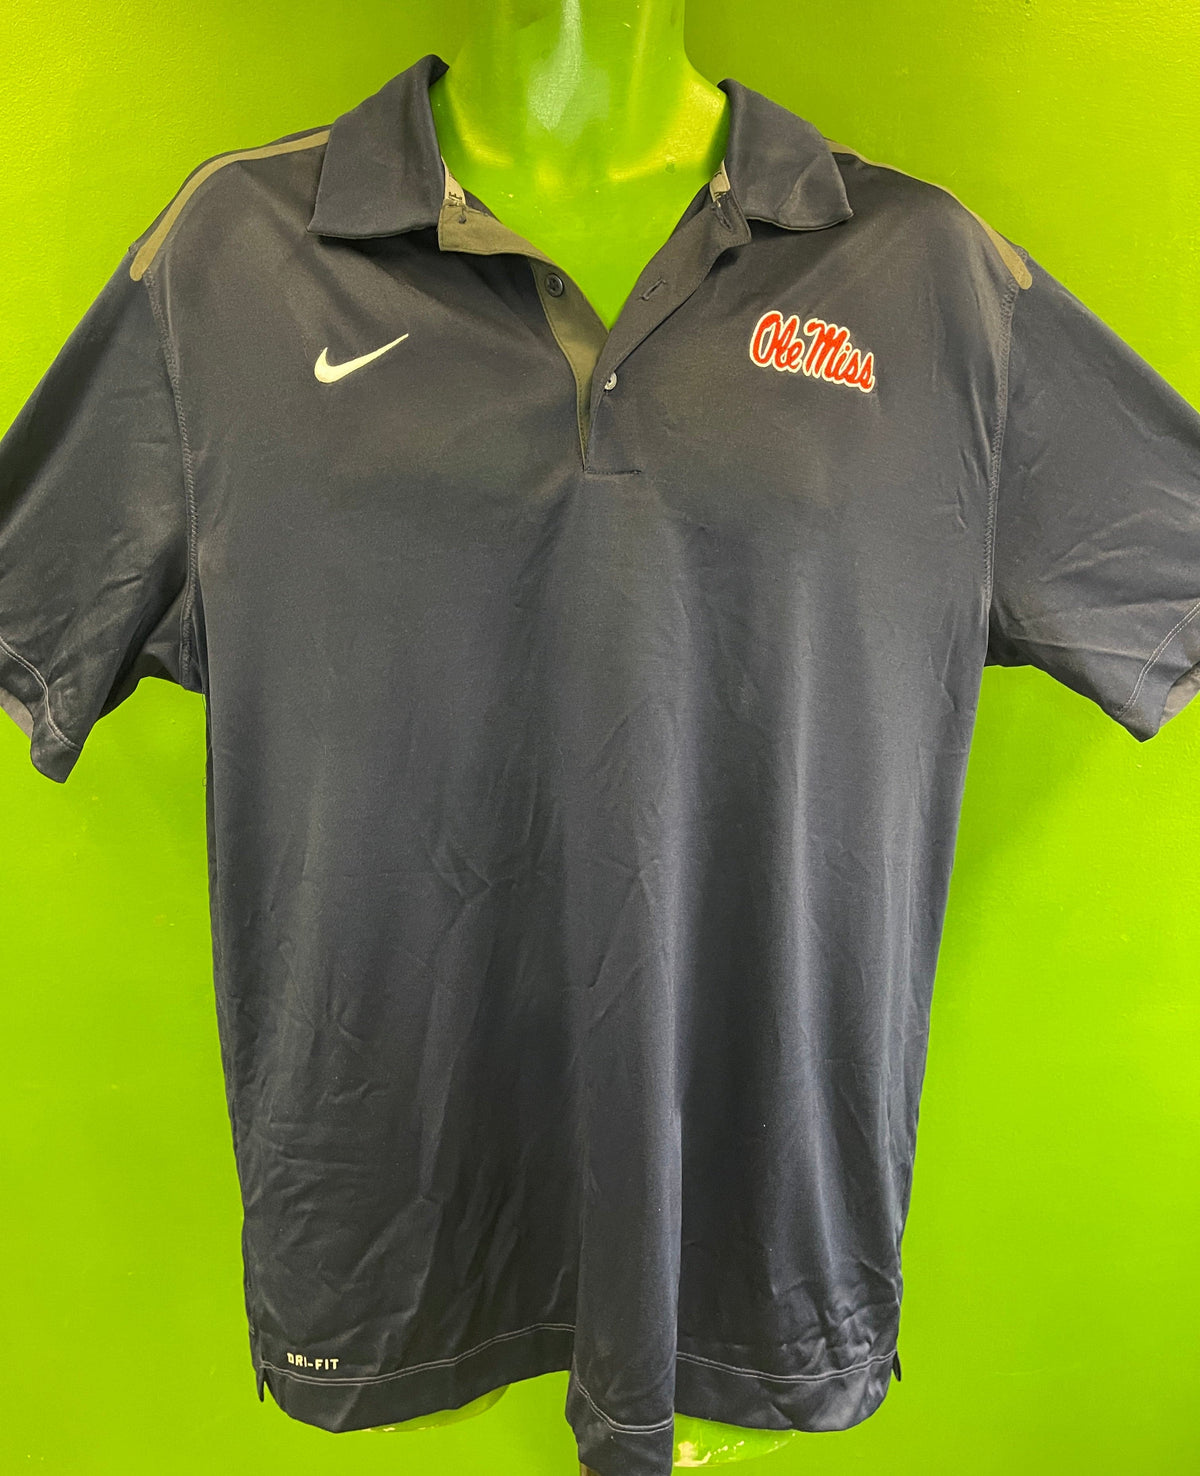 NCAA Ole Miss Mississippi Rebels Dri-Fit Sheer Golf Polo Shirt Men's Large